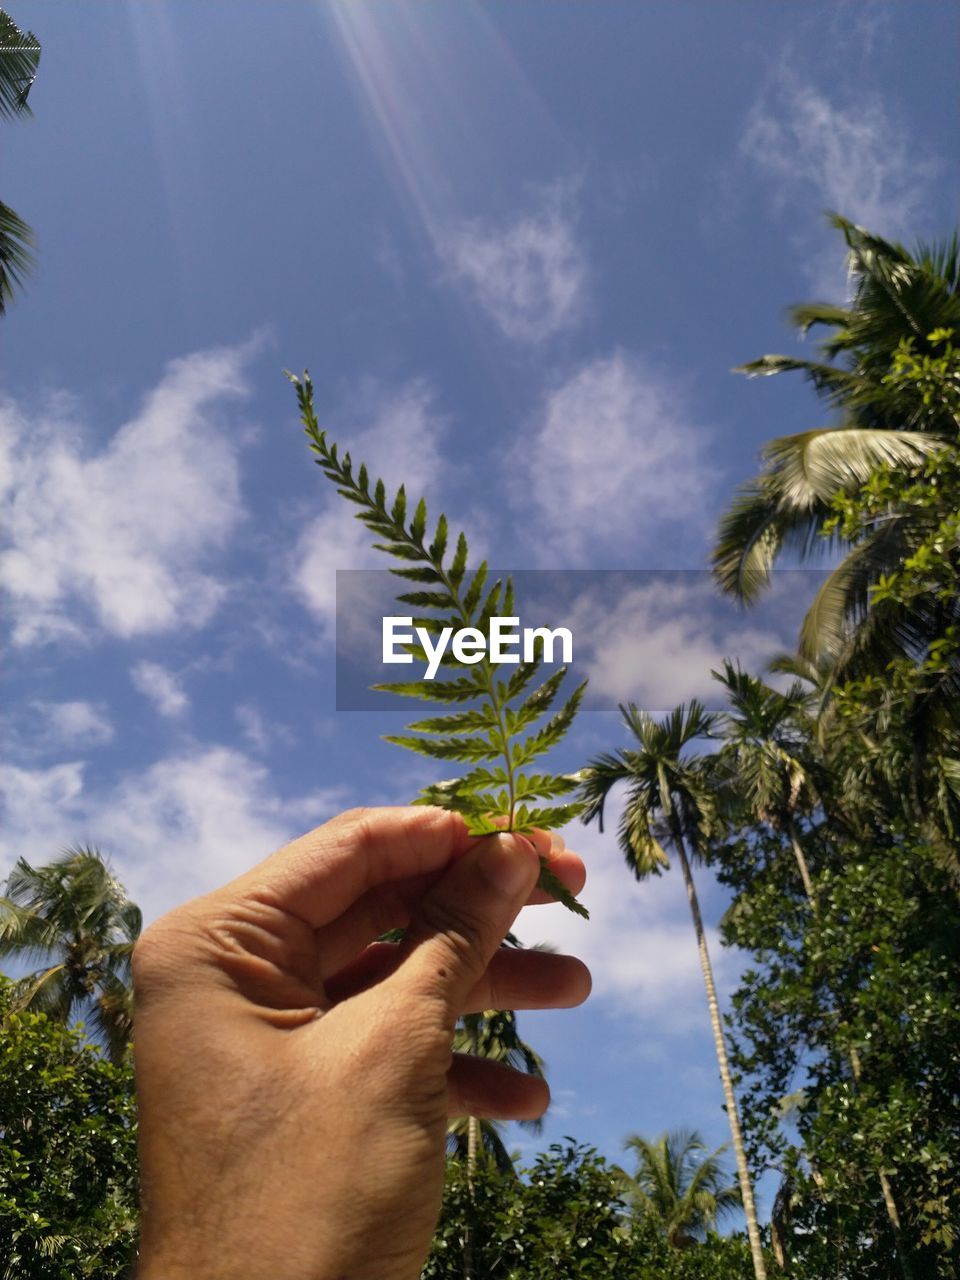 Image of person holding plant against sky